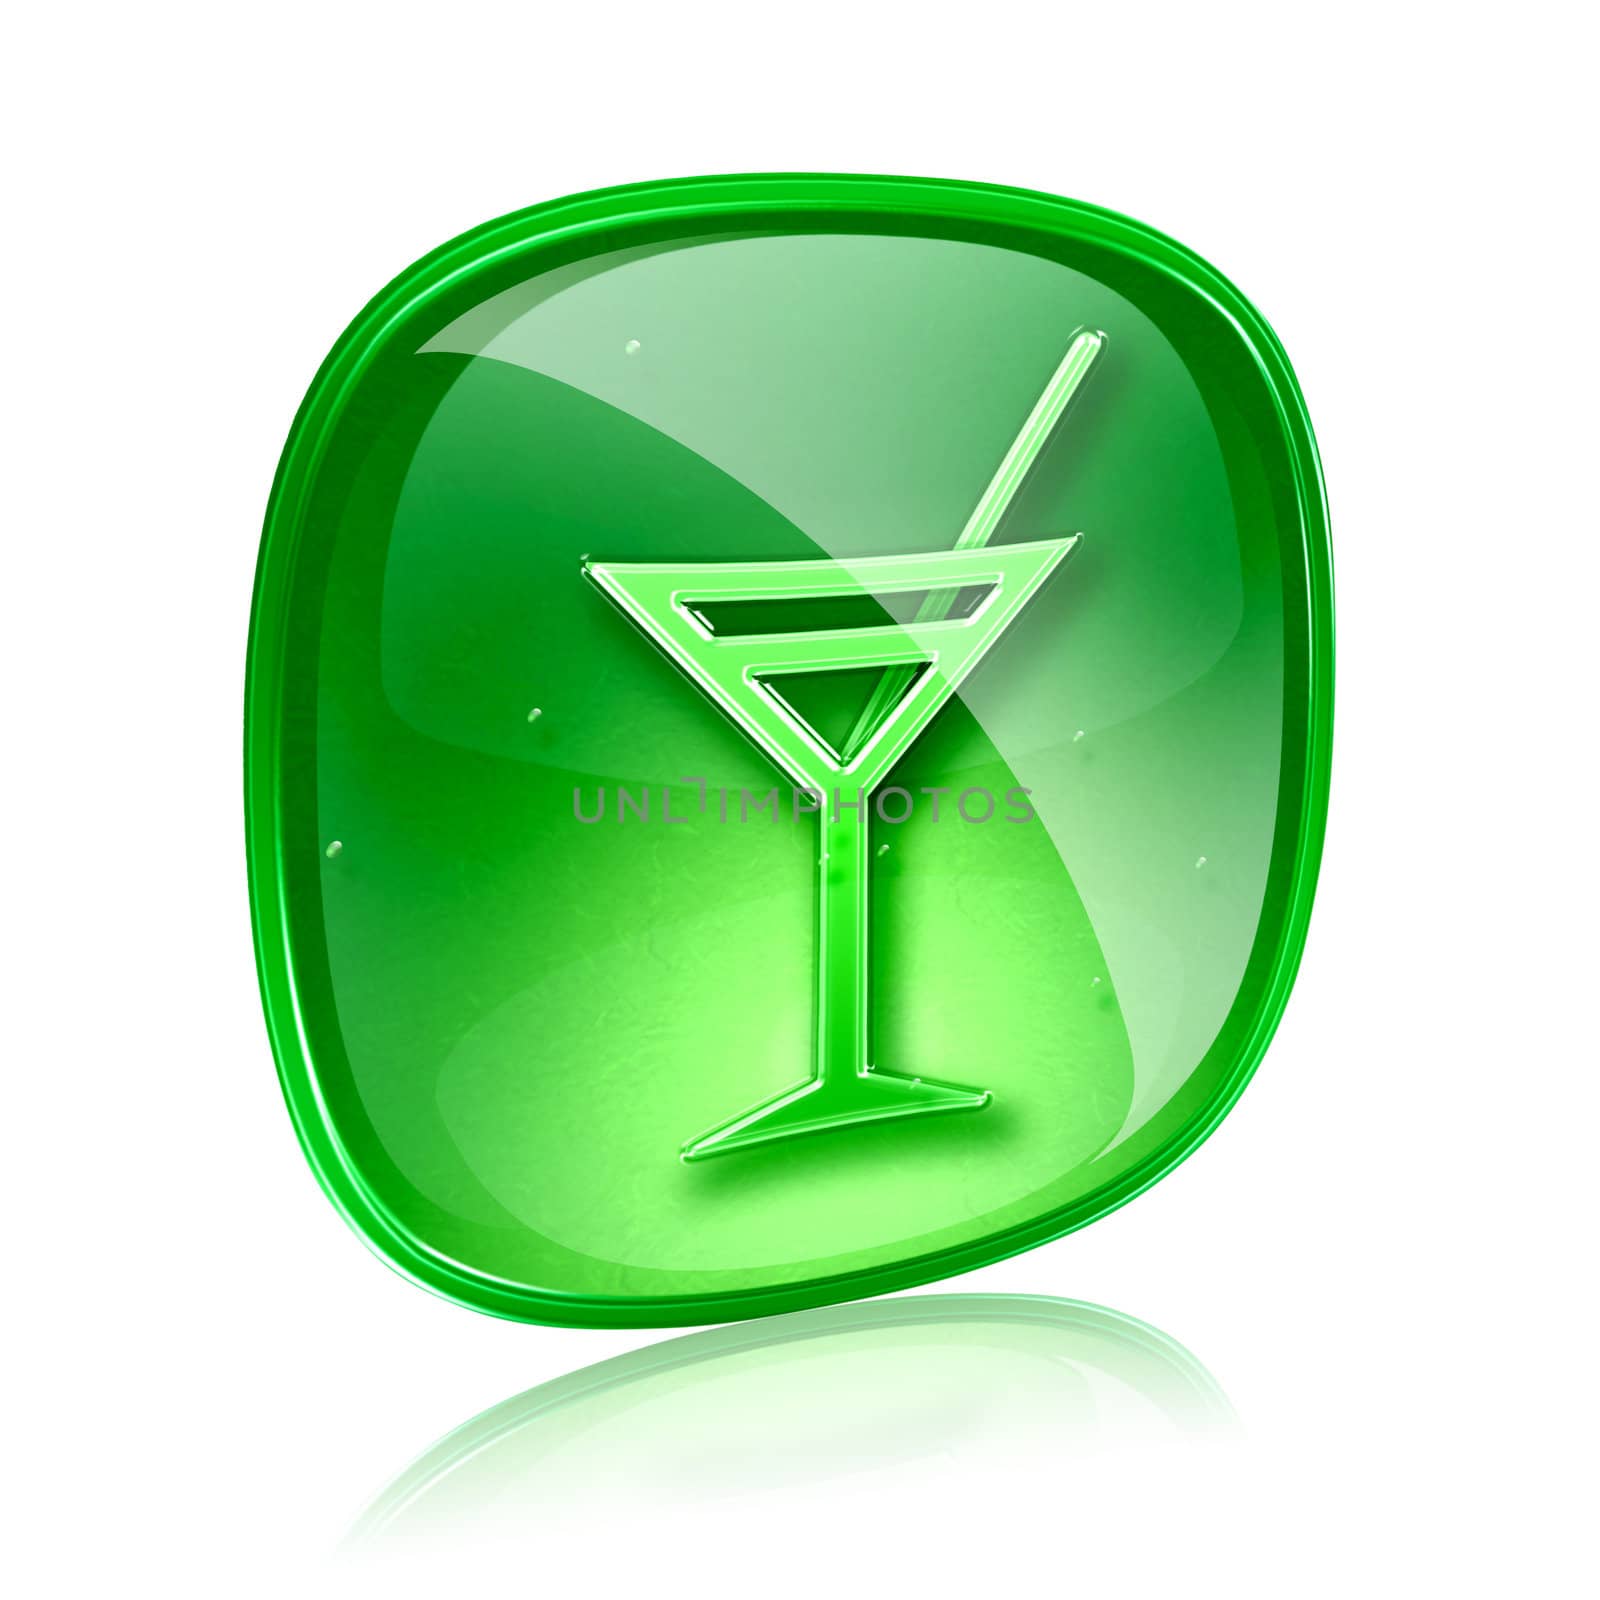 wine-glass icon green glass, isolated on white background. by zeffss